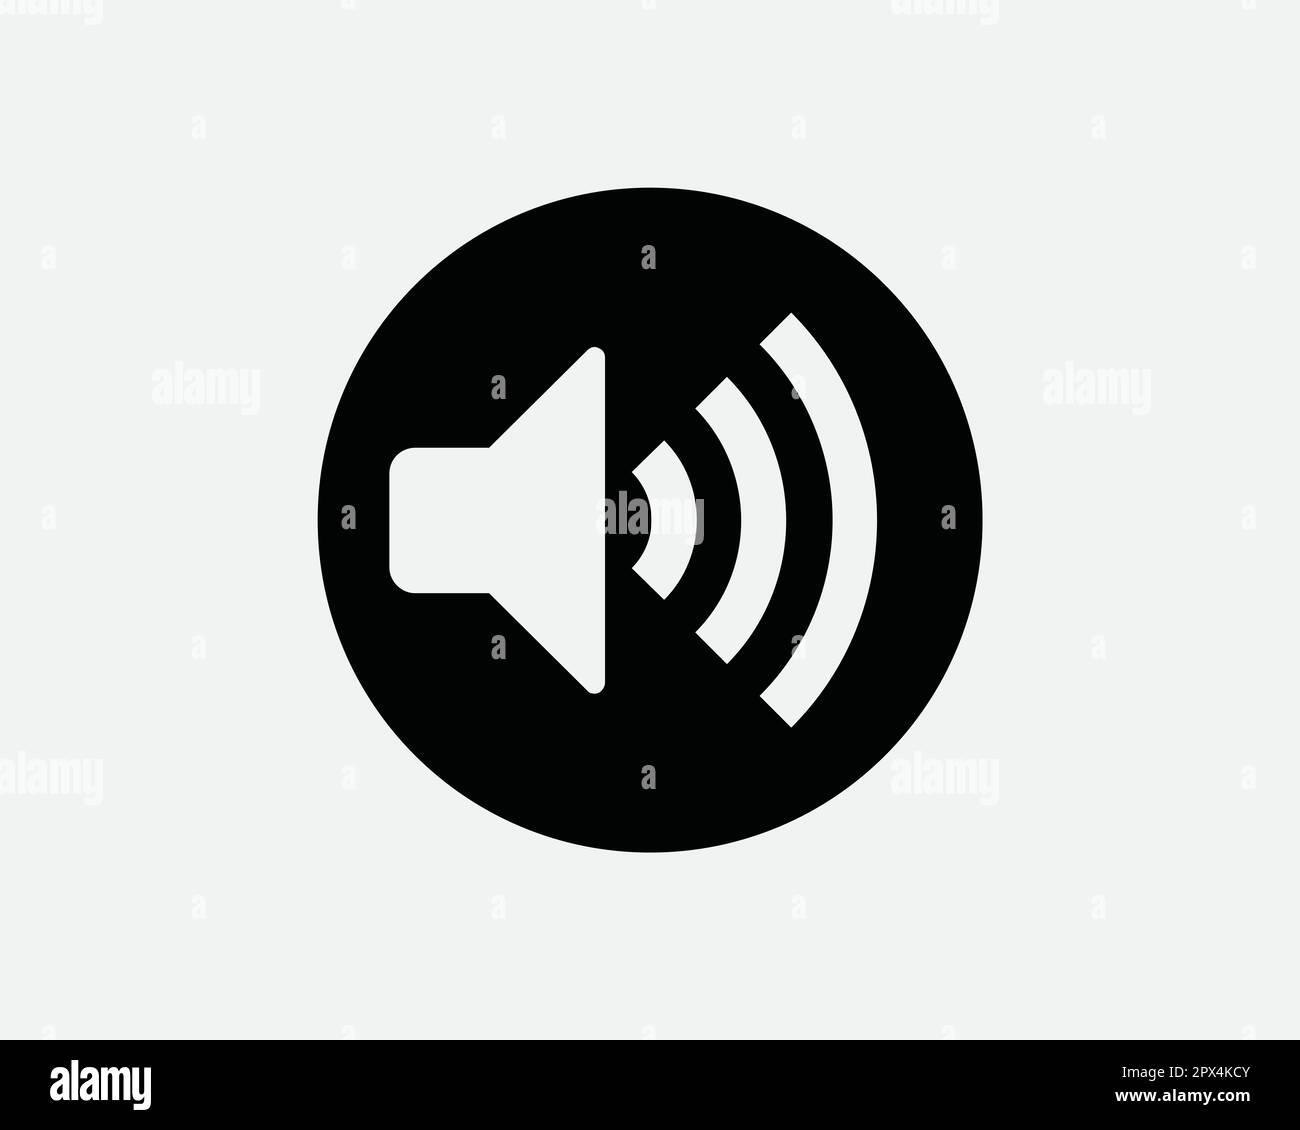 Max Volume Circle Icon. Loud Speaker Increase Up Sound Round Symbol. Maximum Audio Stereo Sign. Black and White Vector Graphic Illustration Clipart Stock Vector